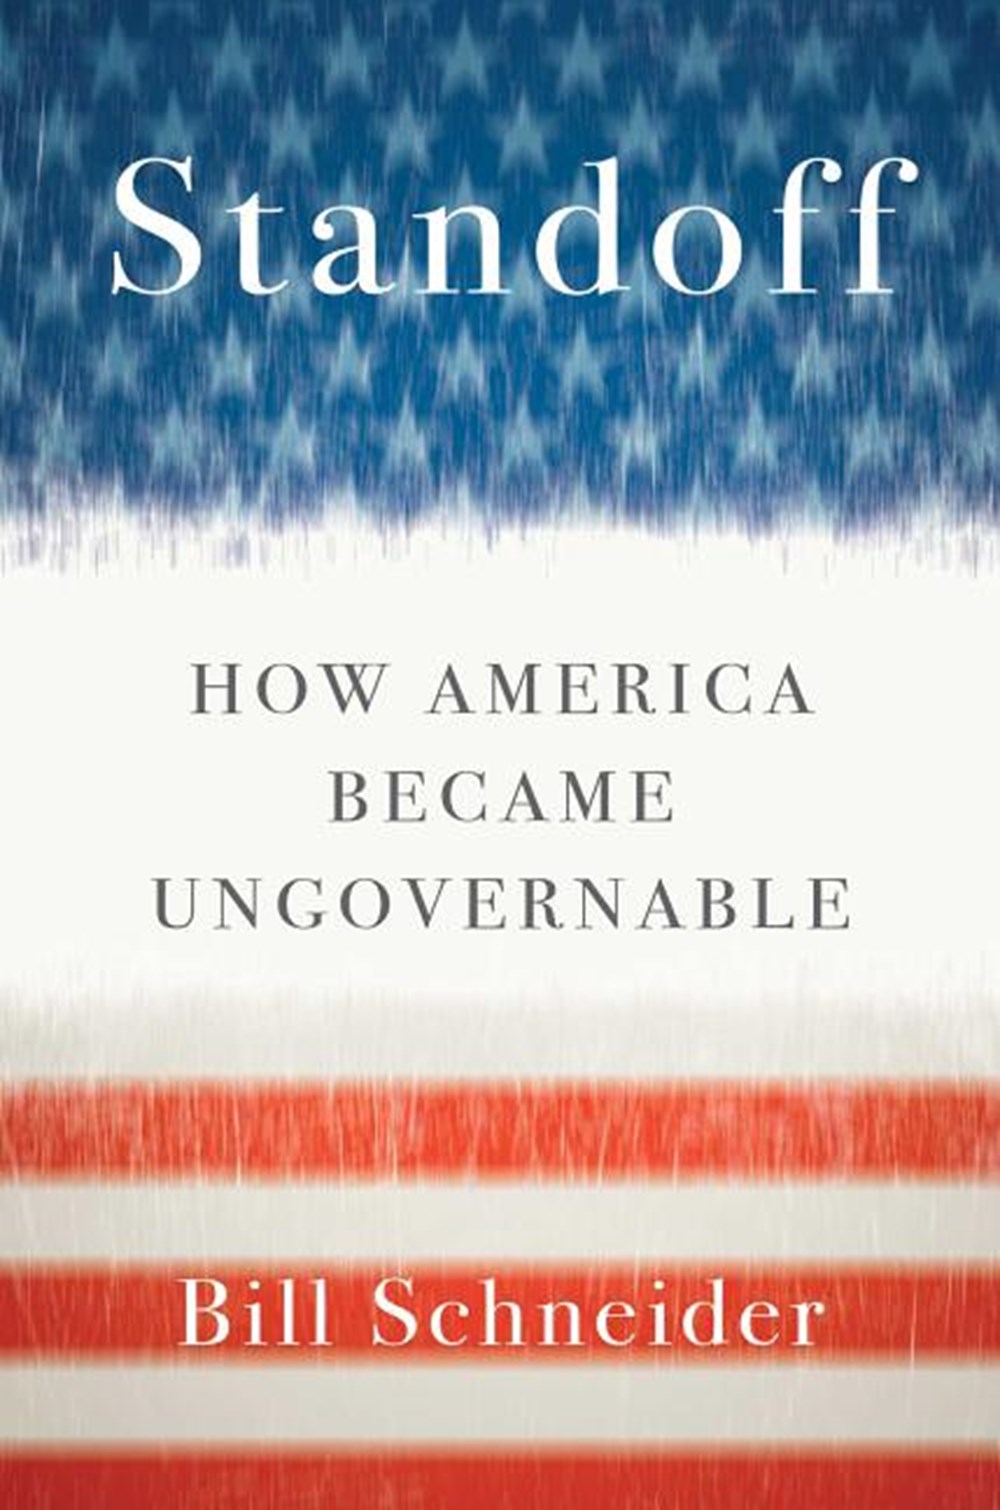 Standoff: How America Became Ungovernable